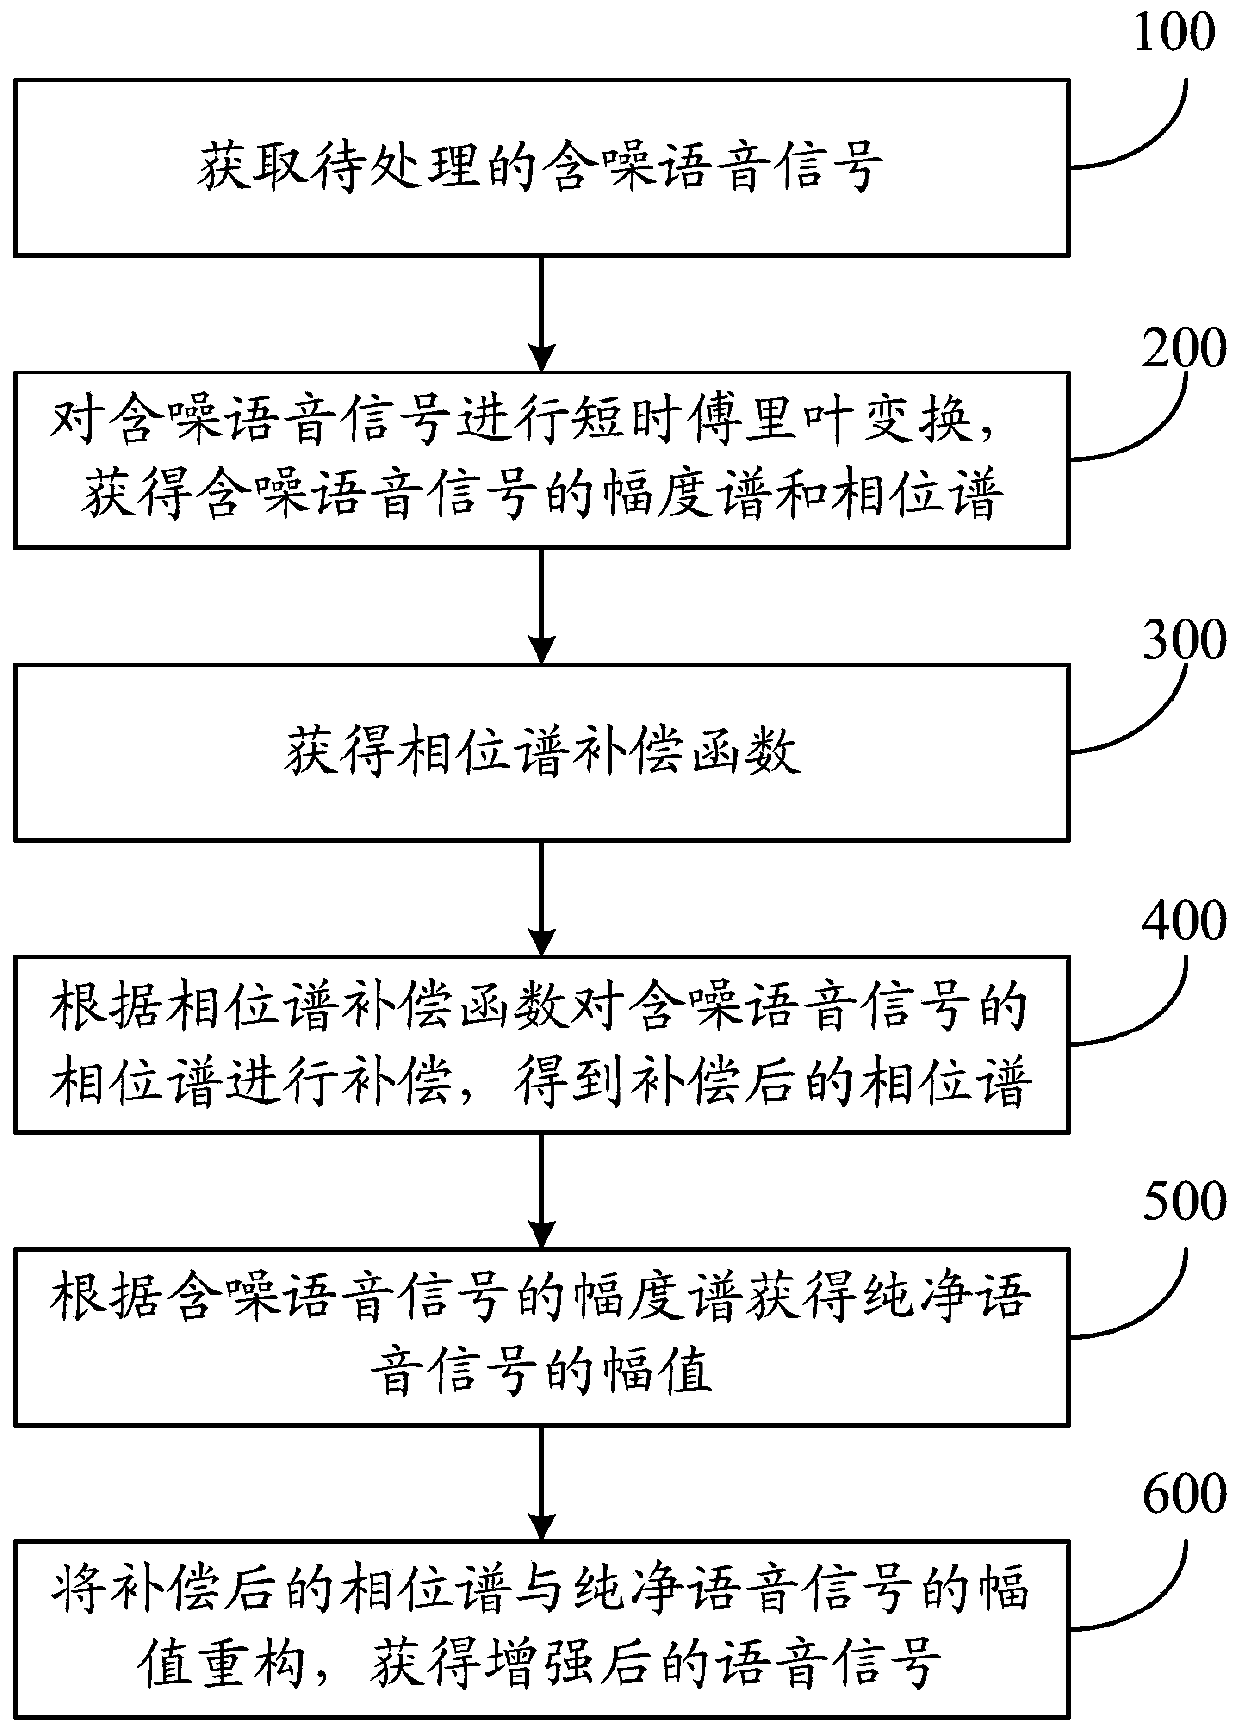 A speech enhancement method and system based on phase compensation